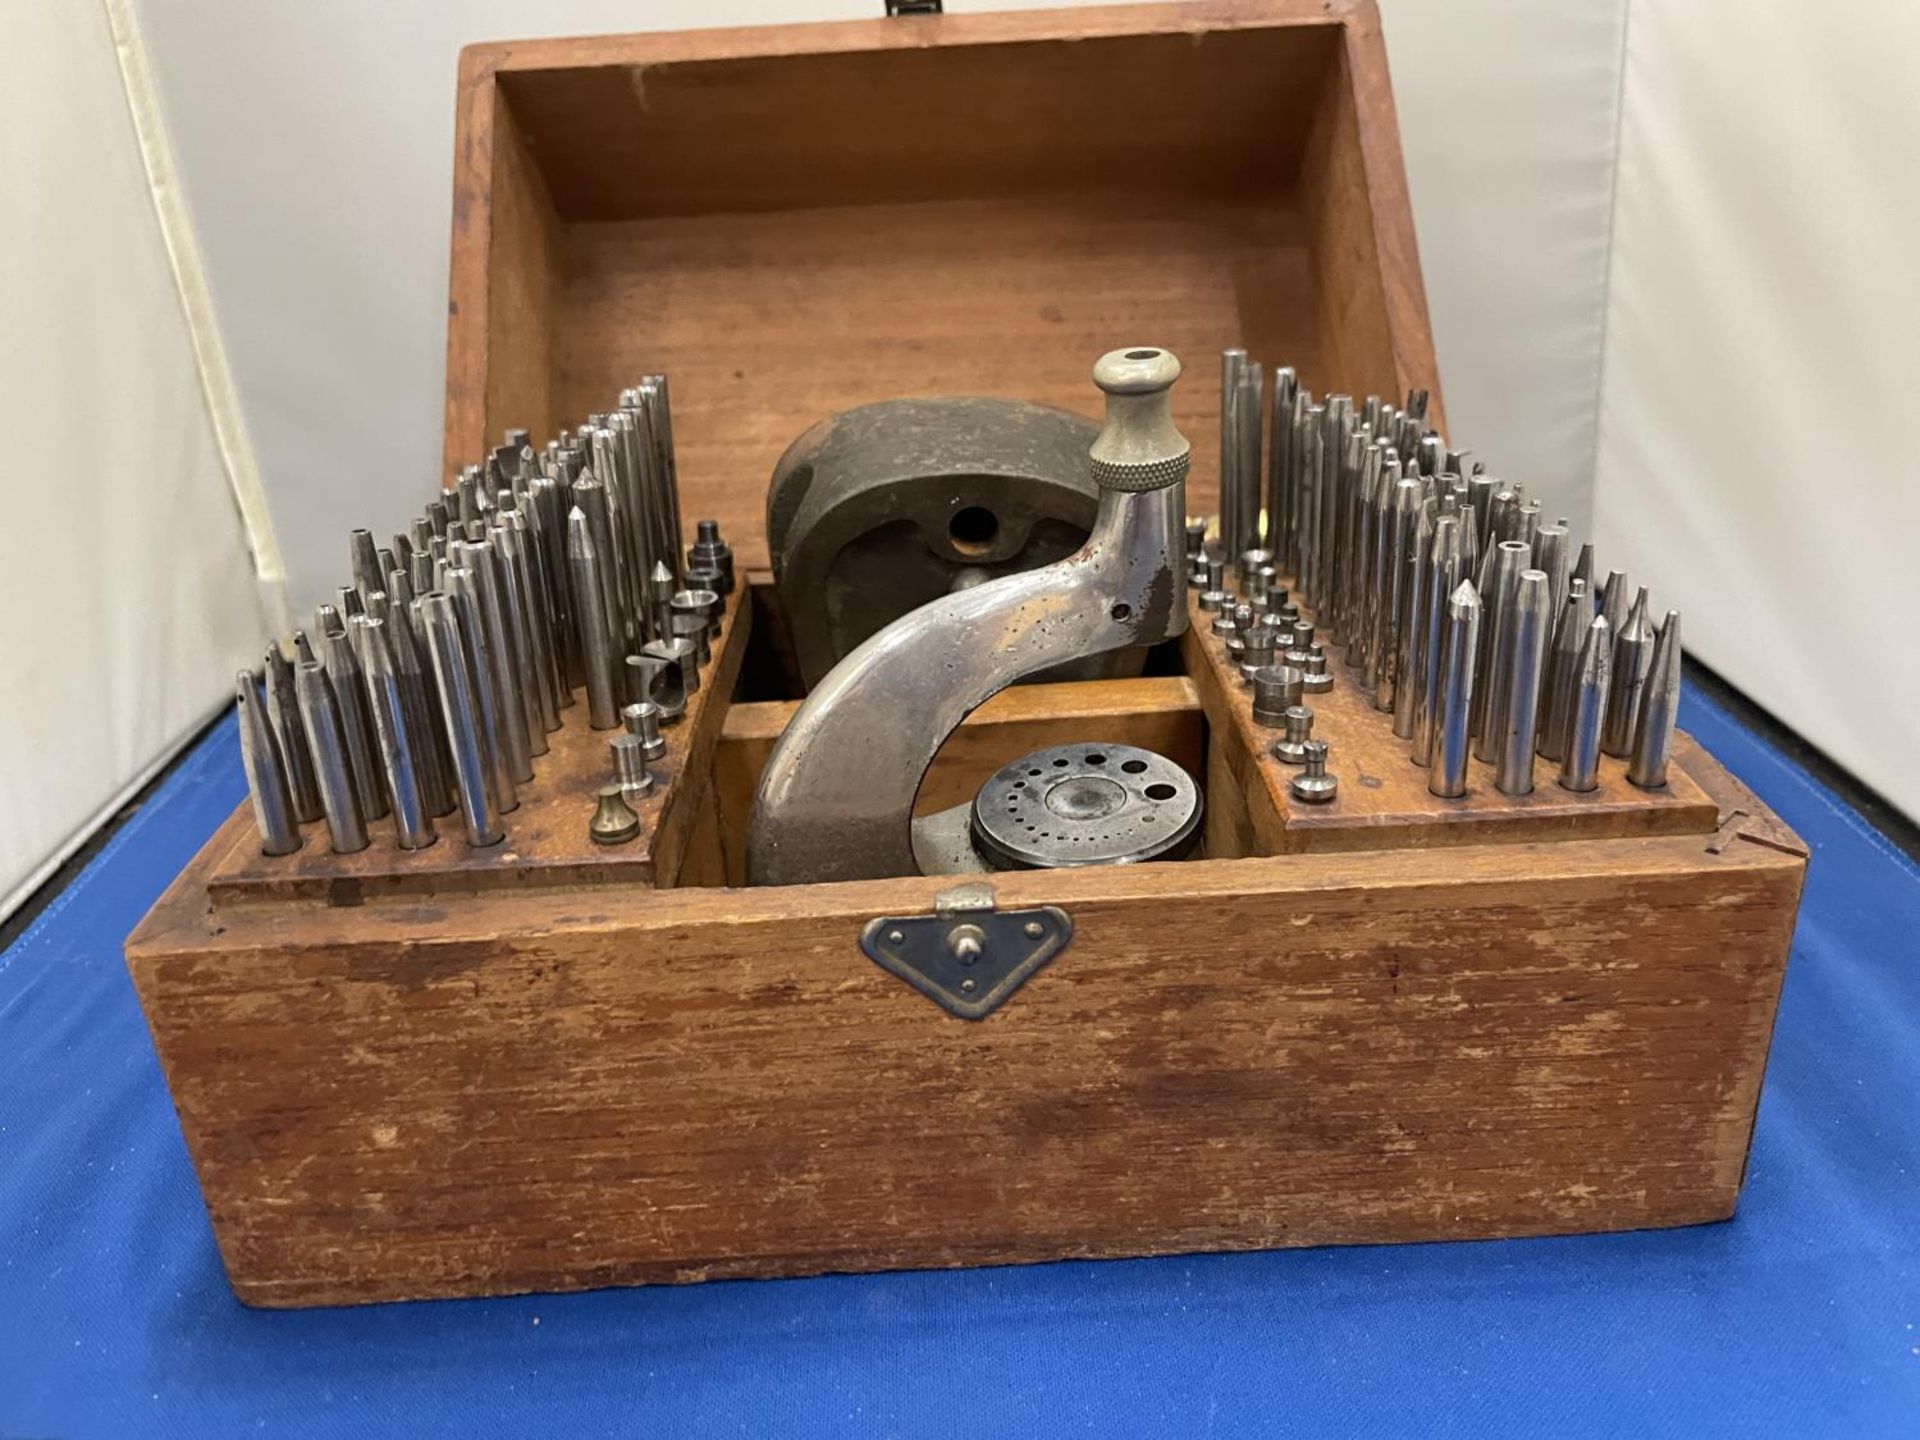 A BOLEY WATCHMAKERS RIVETING AND STAKING TOOLS (COMPLETE SET) IN ORIGINAL WOODEN BOX - Image 6 of 14